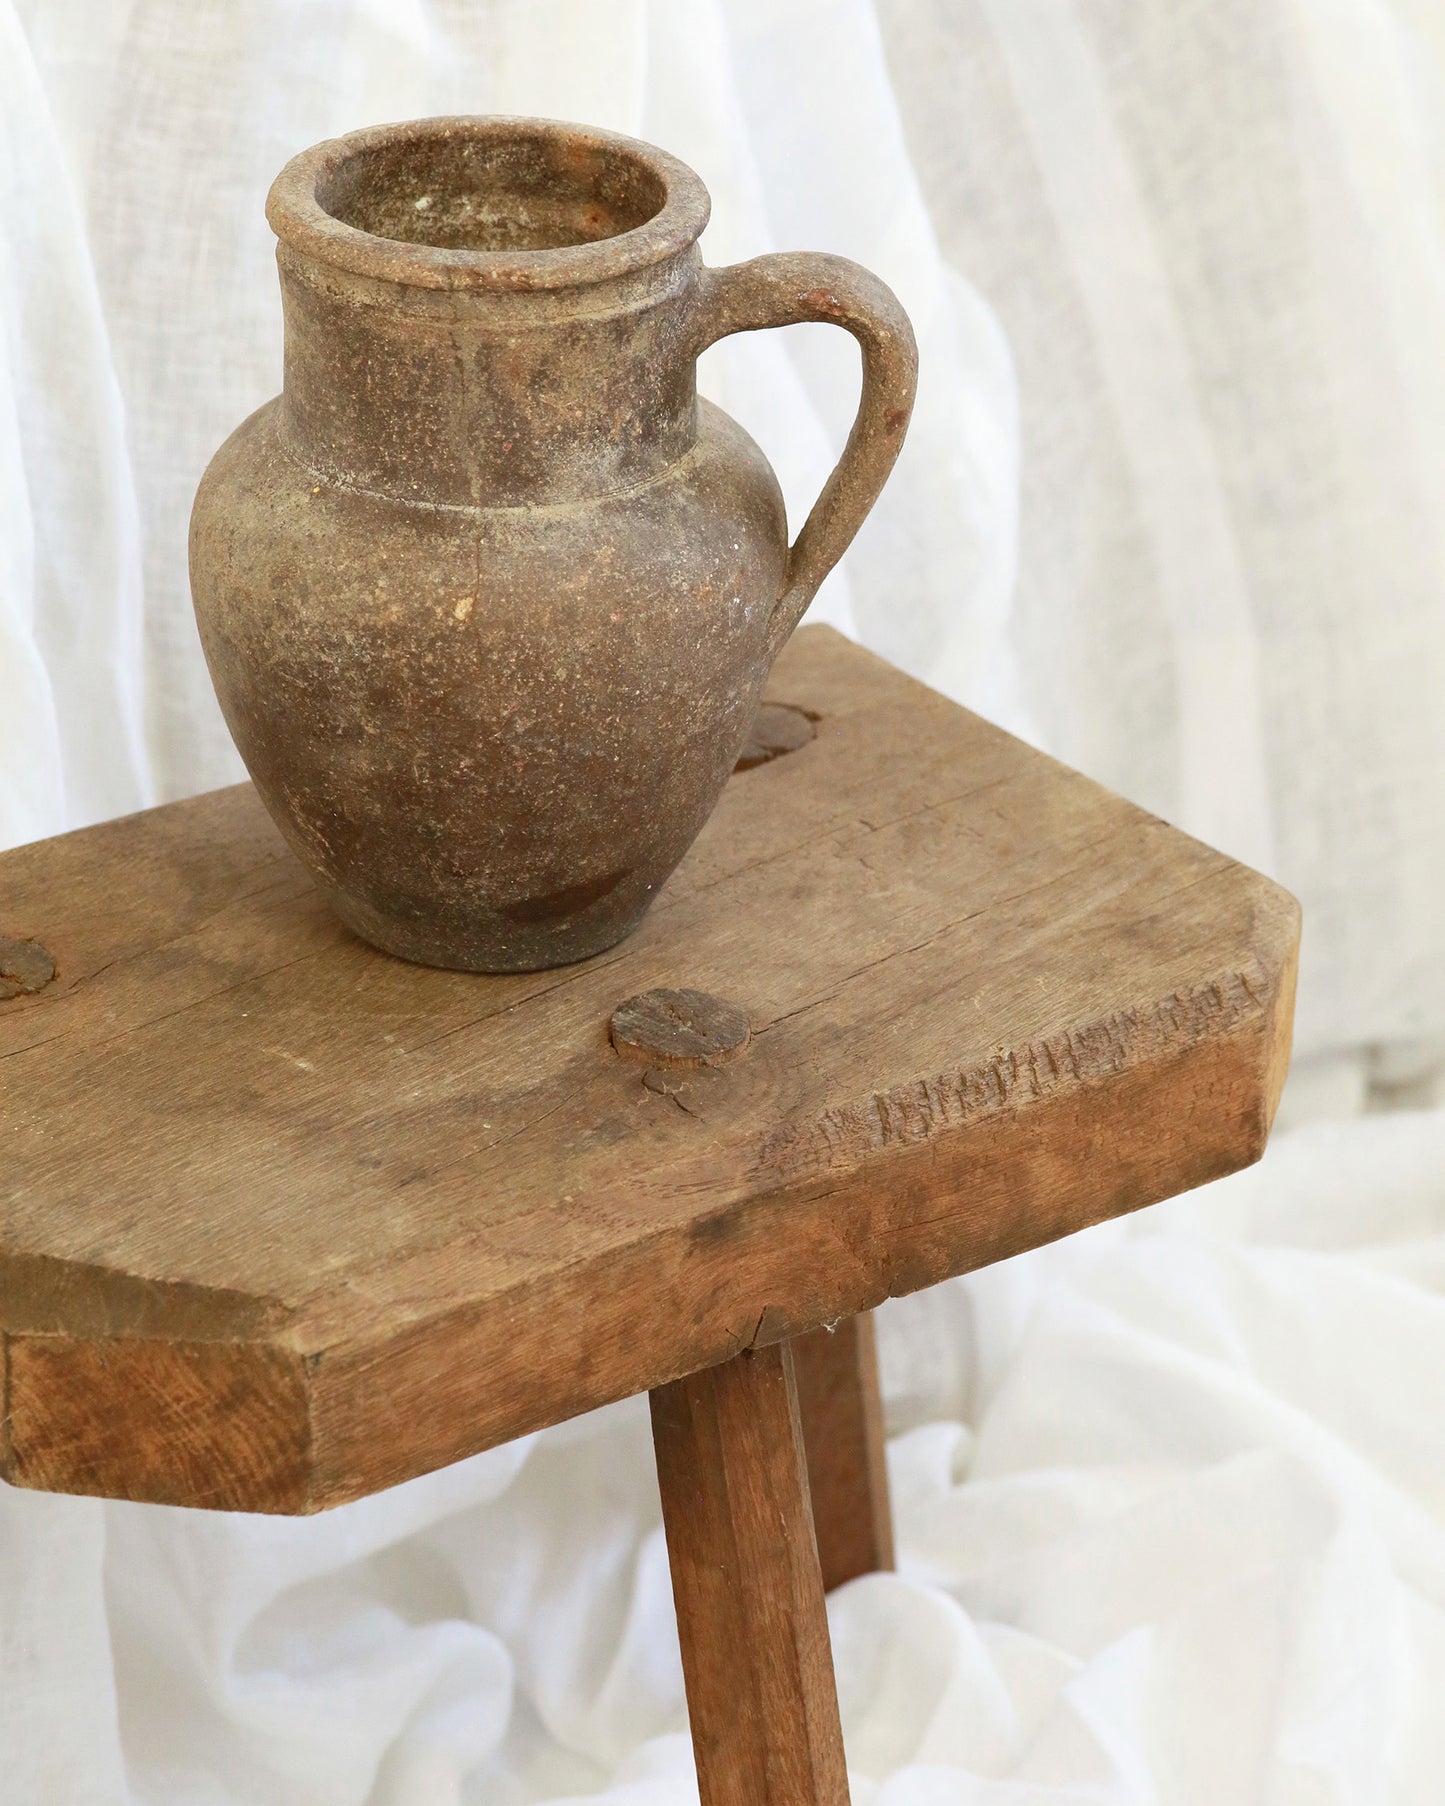 Wooden Milking Stool with jug